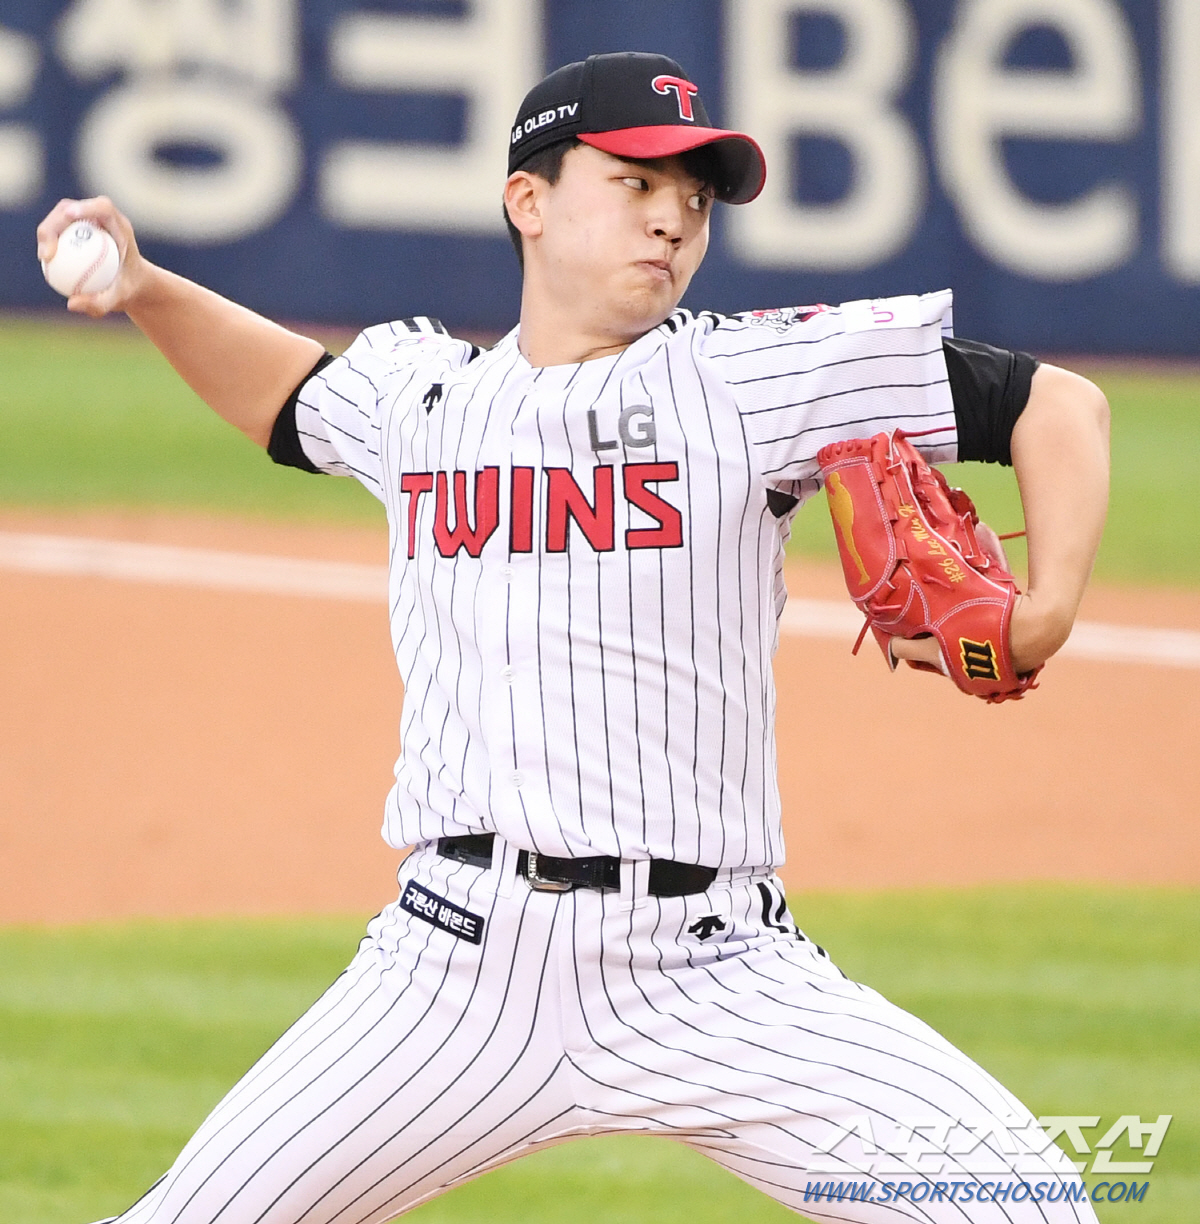 Lee Min-ho, a high school graduate of LG Twins, continued to grow with his second start-up.Lee Min-ho started the home game against the Samsung Lions Lions at Jamsil-dong on Sunday, allowing 5 Hit in seven innings and allowing two runs before going down the Mound.Lee Min-ho made his first start against the Samsung Lions in Deagu on the 21st of last month and won the victory with a 513 innings 1 Hit 4 walks and no runs.At that time, Ryu Jung-il was an impressive selection debut game that made headlines by stroking Lee Min-hos head down Mound and raising his thumb.Lee Min-ho, who was excluded from the first-team entry the next day due to the teams Rotation strategy, returned to the day and started again against the Samsung Lions.Lee Min-ho, who gave up two points in the first inning, was shaken by the opponents starter Won Tae-in, but soon found stability and achieved his first quality start.He had 100 pitches, and three four sand dunes and seven Striking.He showed his ability to upgrade to a starting pitch by throwing a fastball up to 150 km, a cutter around 140 km, a slider and a curve.The start was not good due to anxiety. The difference between strike and ball was so large that 28 pitches were high.Lee Min-ho, who gave up a hit in front of right fielder Kim Sang-su, hit a first and second runners with Park Chan-do on walks.Tyler Saladino, who is proud of his recent hitting sensation, scored two runs with a 120-kilometer curve thrown from the ball count 2B2S in the middle and a two-run double through the left side of the third baseman.But when Saladino was greedy to third base, Lee Min-ho grabbed Lee Won-seok as first baseman fly ball and Hak-ju Lee as a rookie striking and found stability.Lee Min-ho threw nine balls in the second inning to cook all Kim Dong Yub Lee Sung-Gyu Kang Min-ho with a bumper.In the third inning, Kim Sang-su gave up a heavy hit to Kim Sang-su and a left-handed double to Saladino after the second inning, and then moved to second and third bases, and then turned Lee Won-seok to 148km straight to Striking.Lee Min-ho, who held the fourth-time leader Hak-ju Lee with a swinging streak, sent Kim Dong Yub out with a fit ball, but finished the inning with Kim Dong Yub, who attempted to steal second base at Kang Min-hos plate after handling Lee Sung-Gyu with a center field fly.Even in the fifth inning, still two points behind, Lee Min-ho was stable.He used curves, cutters and fastballs evenly and cooked Kang Min-ho Kim Hun-gon Kim Sang-su with three batters.The top spot was the sixth inning, with Park Chan-do in the lead being shaken by straight walks.However, Lee Min-ho handled Saladino, who had taken 2 Hit earlier, with a 129km forkball to swing Striking, then led Lee Won-seok to a body cutter to play a rookie Striking, Hak-ju Lee to a second baseman grounder and lightly blocked the innings.